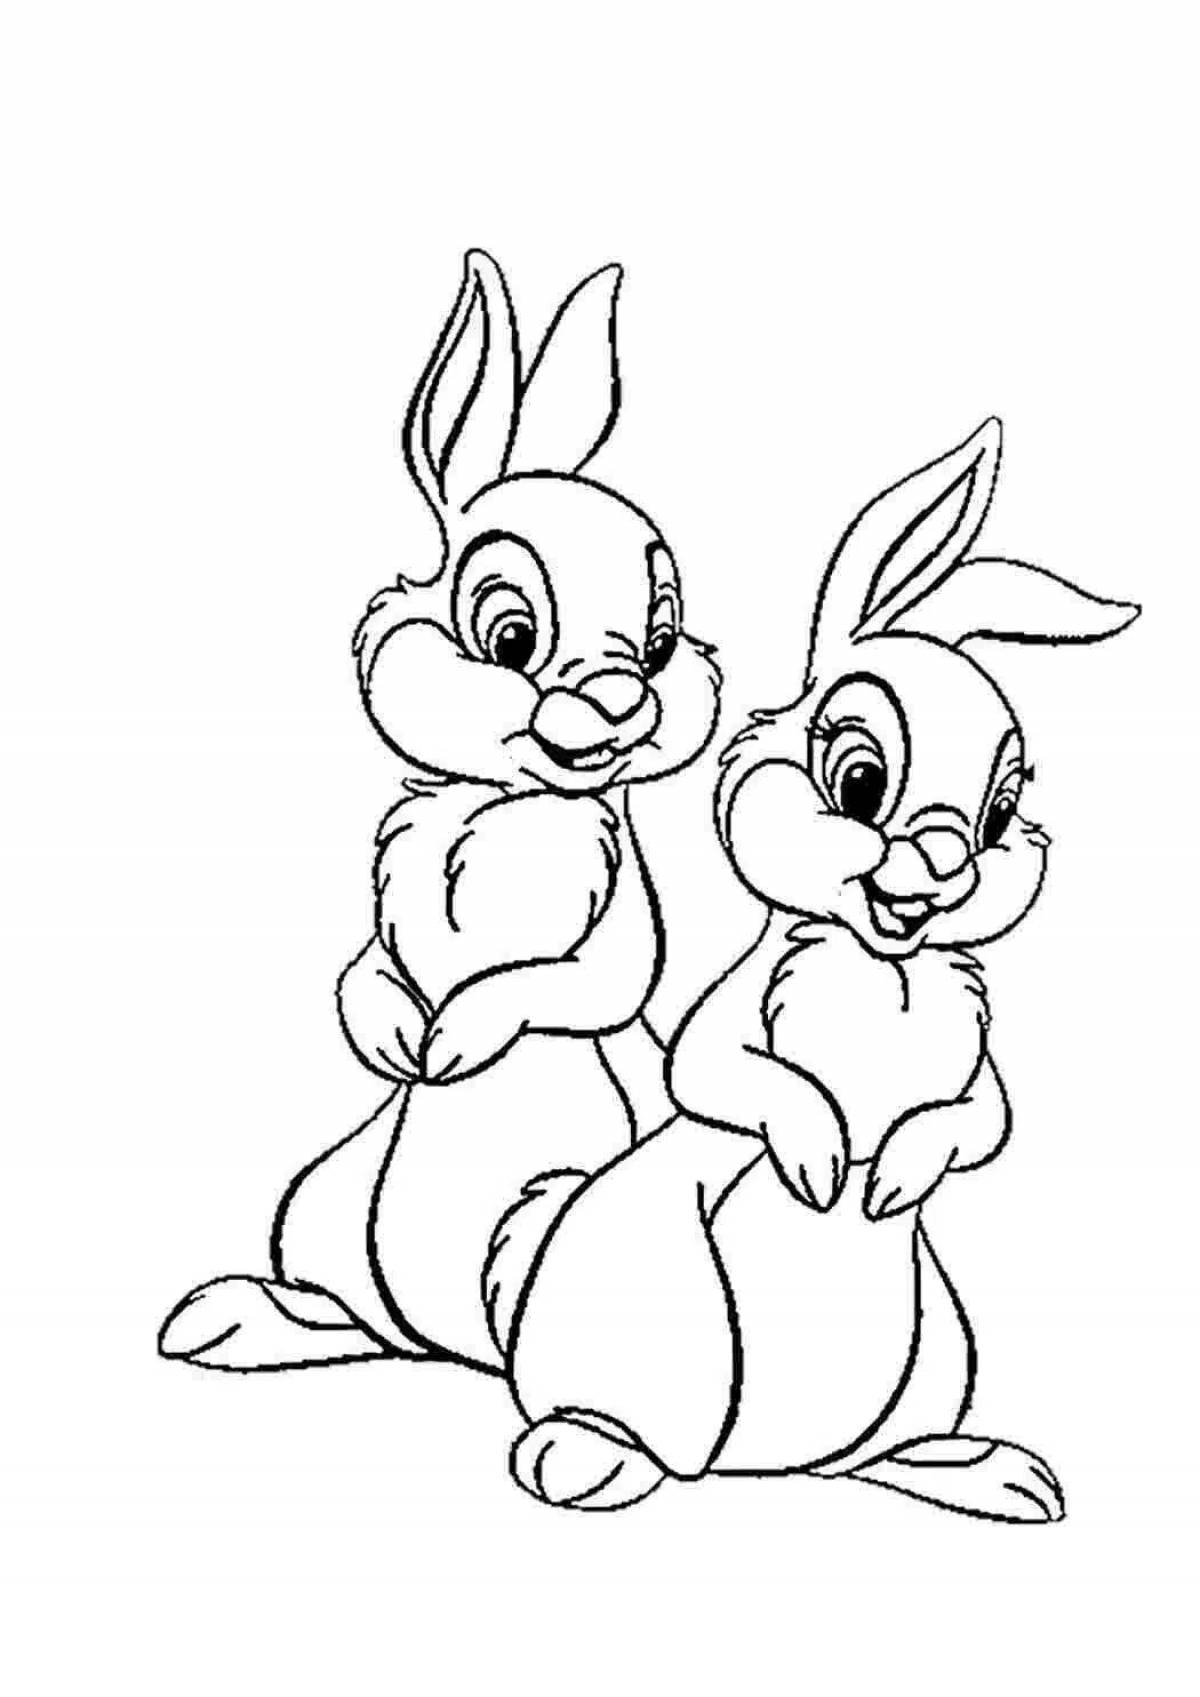 Blissful rabbit and squirrel coloring book